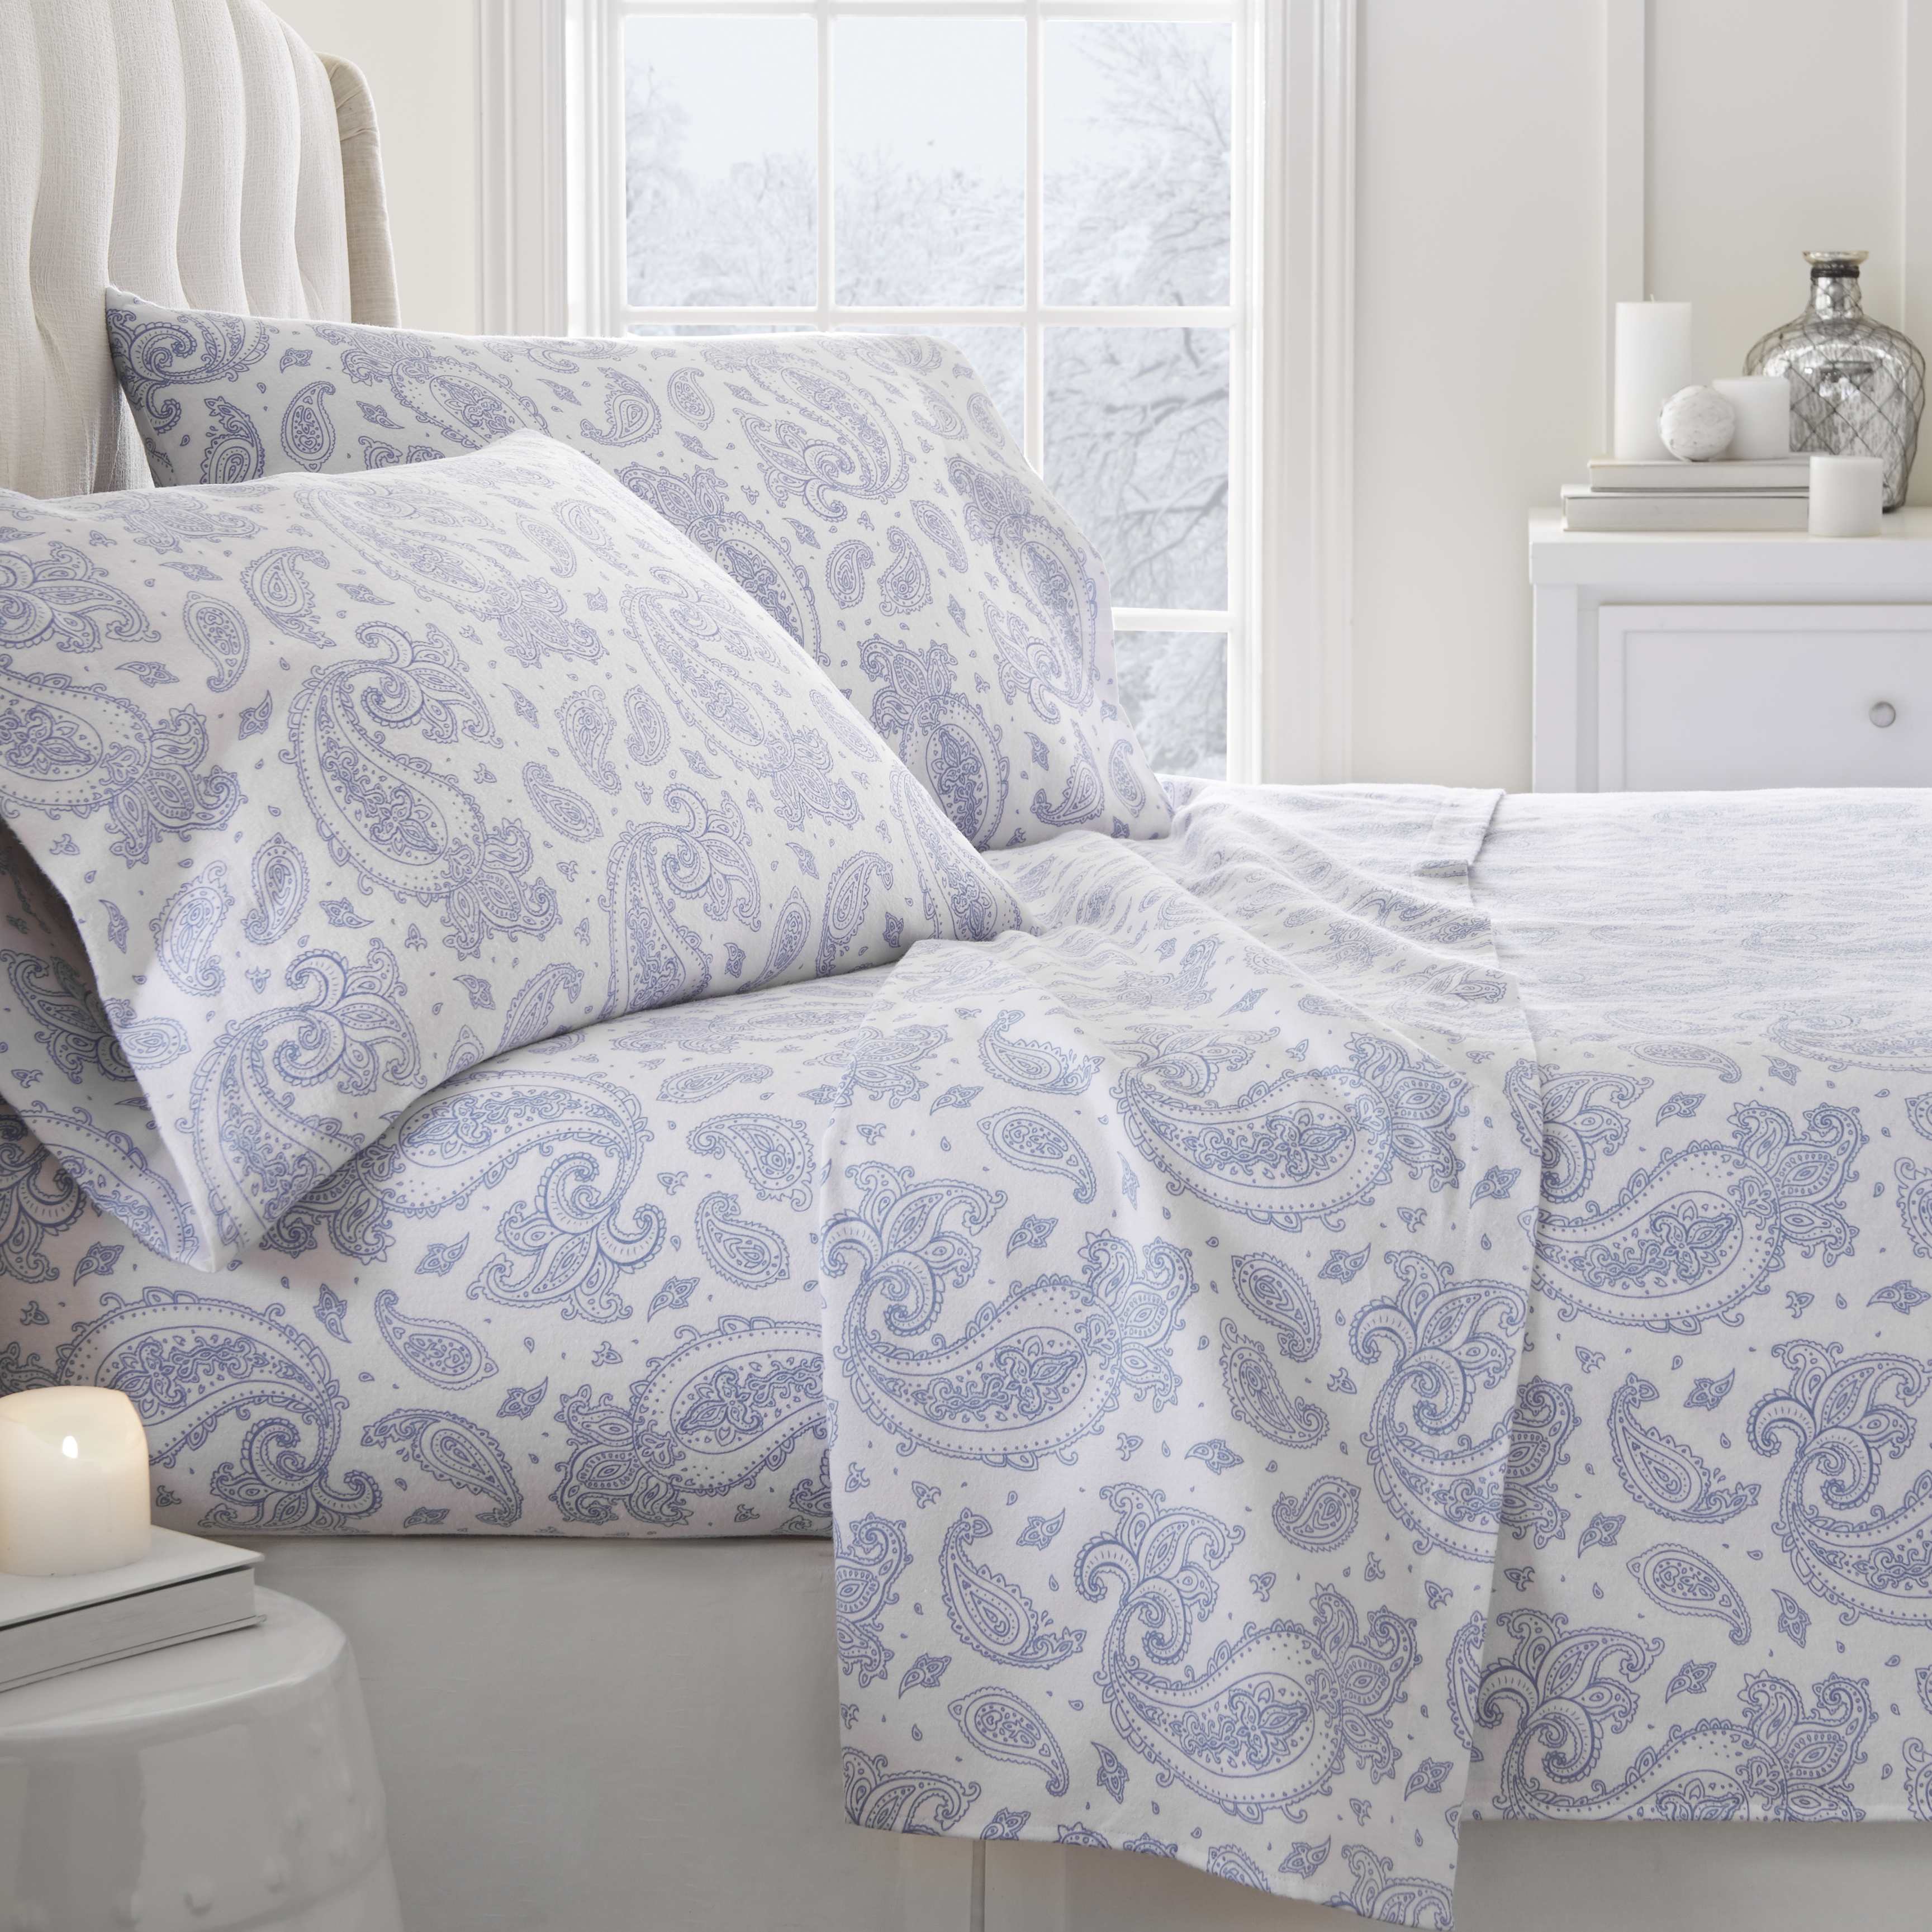 Home Collection Premium Paisley Pattern 4 Piece Flannel Bed Sheet Set - California King